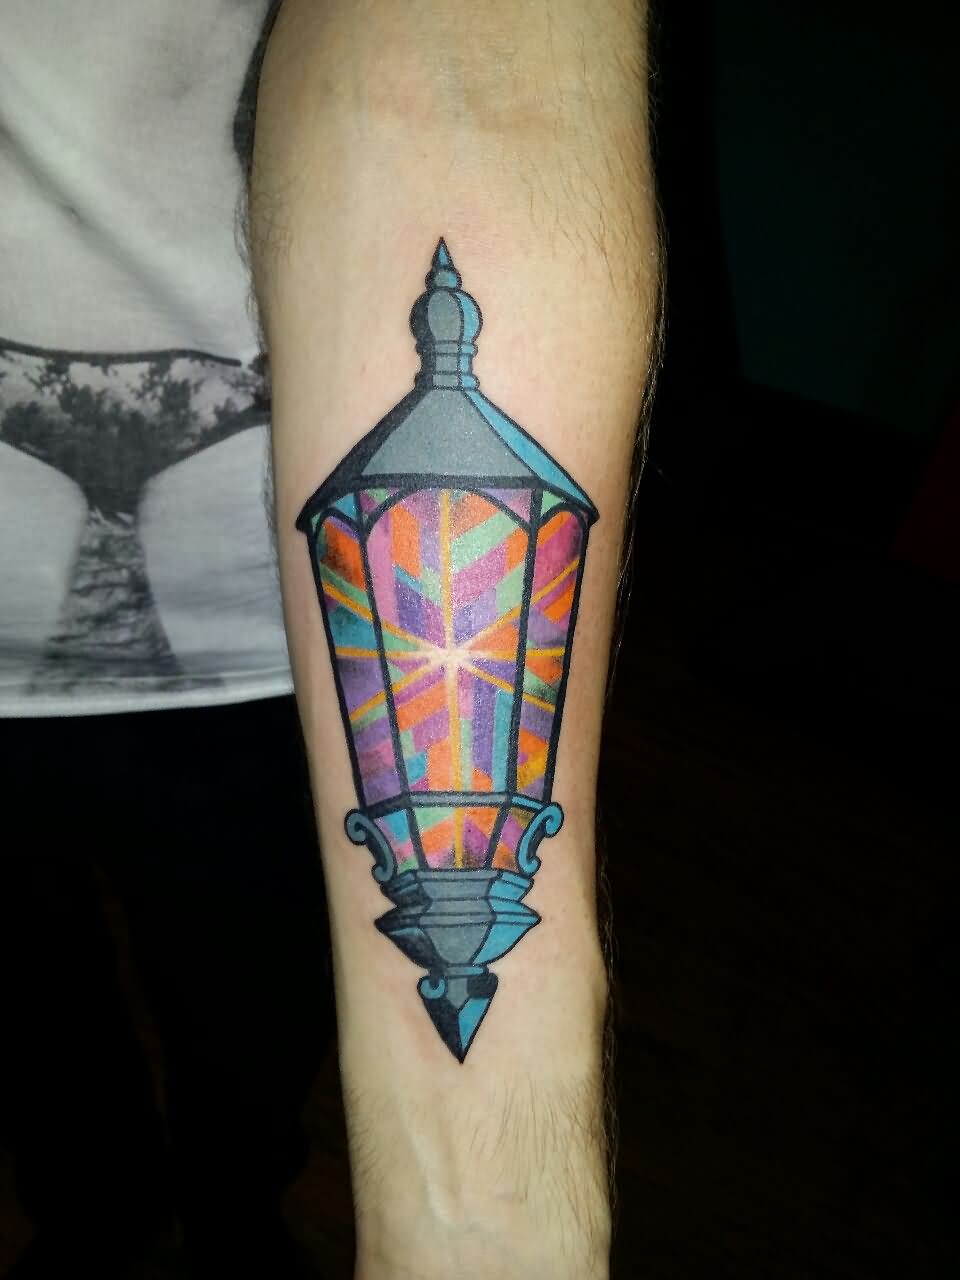 Stained Glass Lantern Tattoo On Forearm